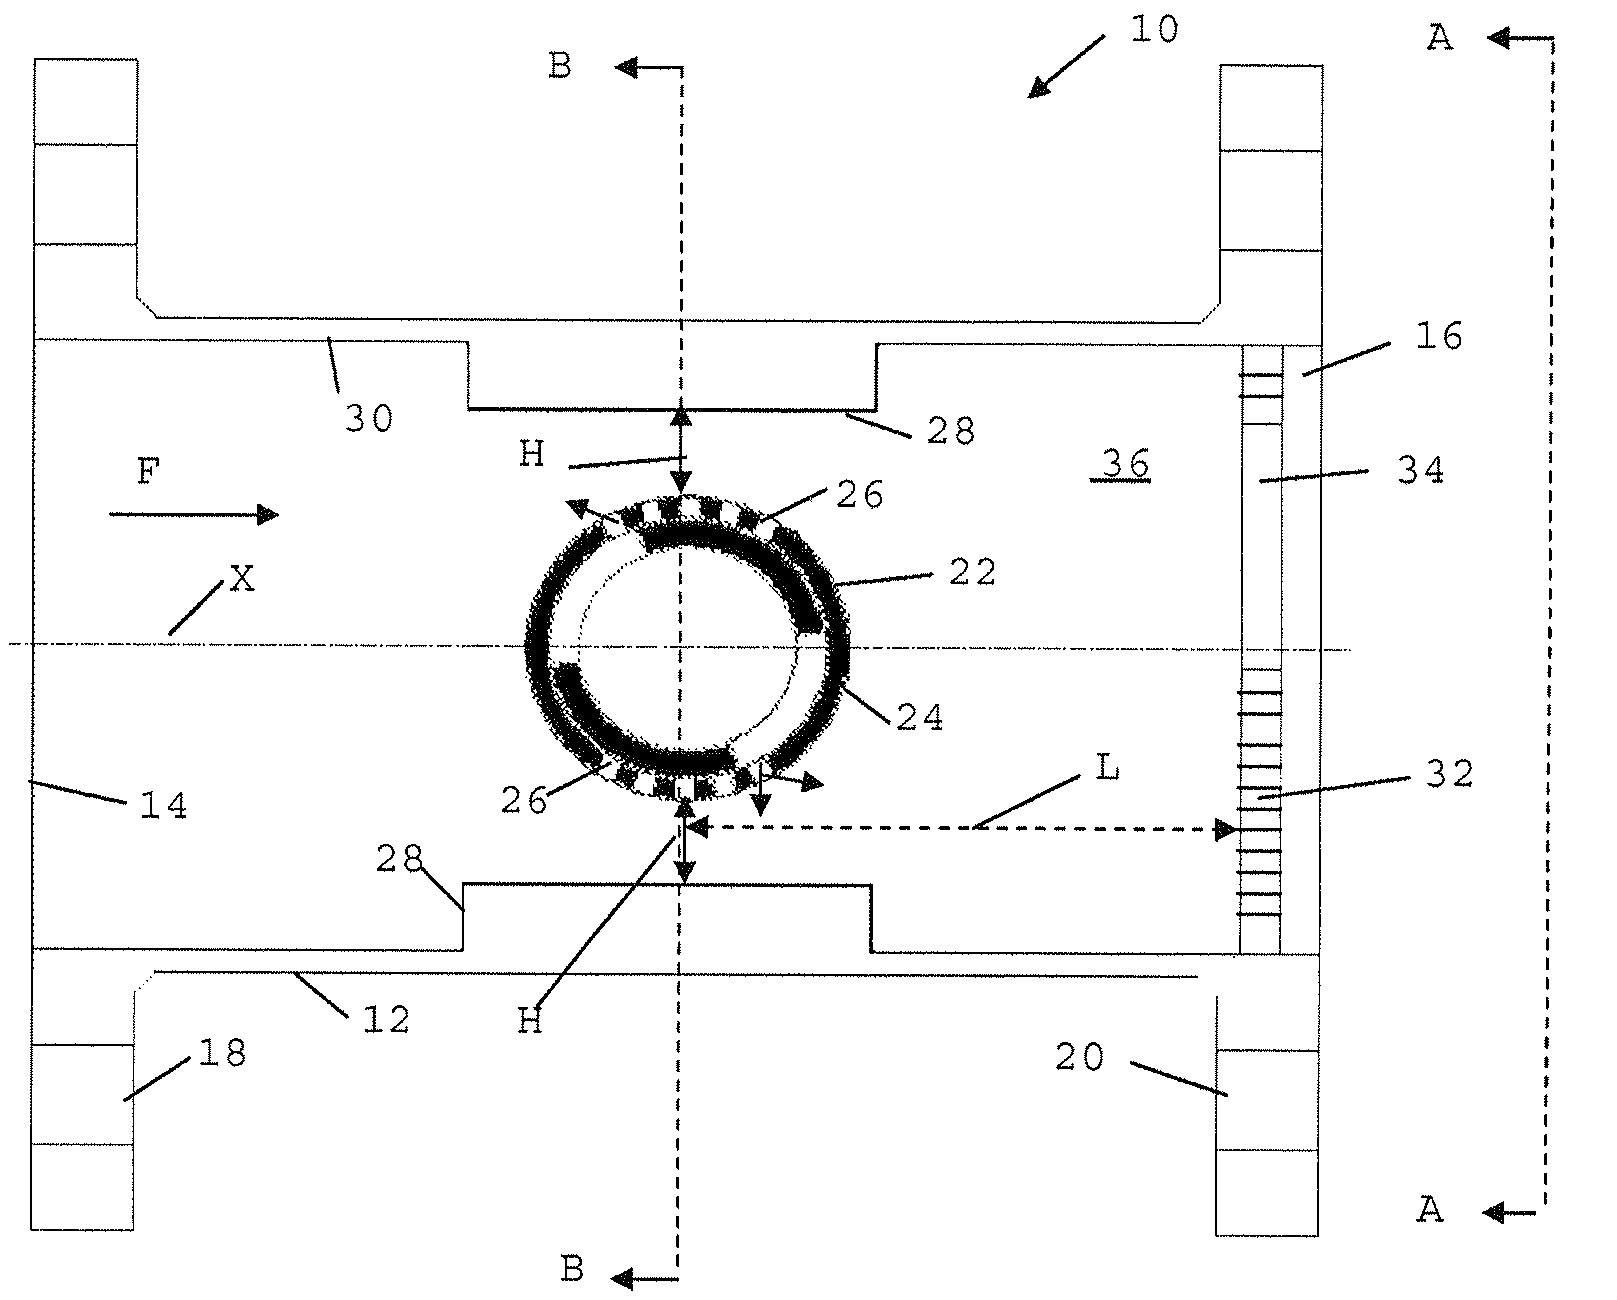 Apparatus for mixing a substance into a medium